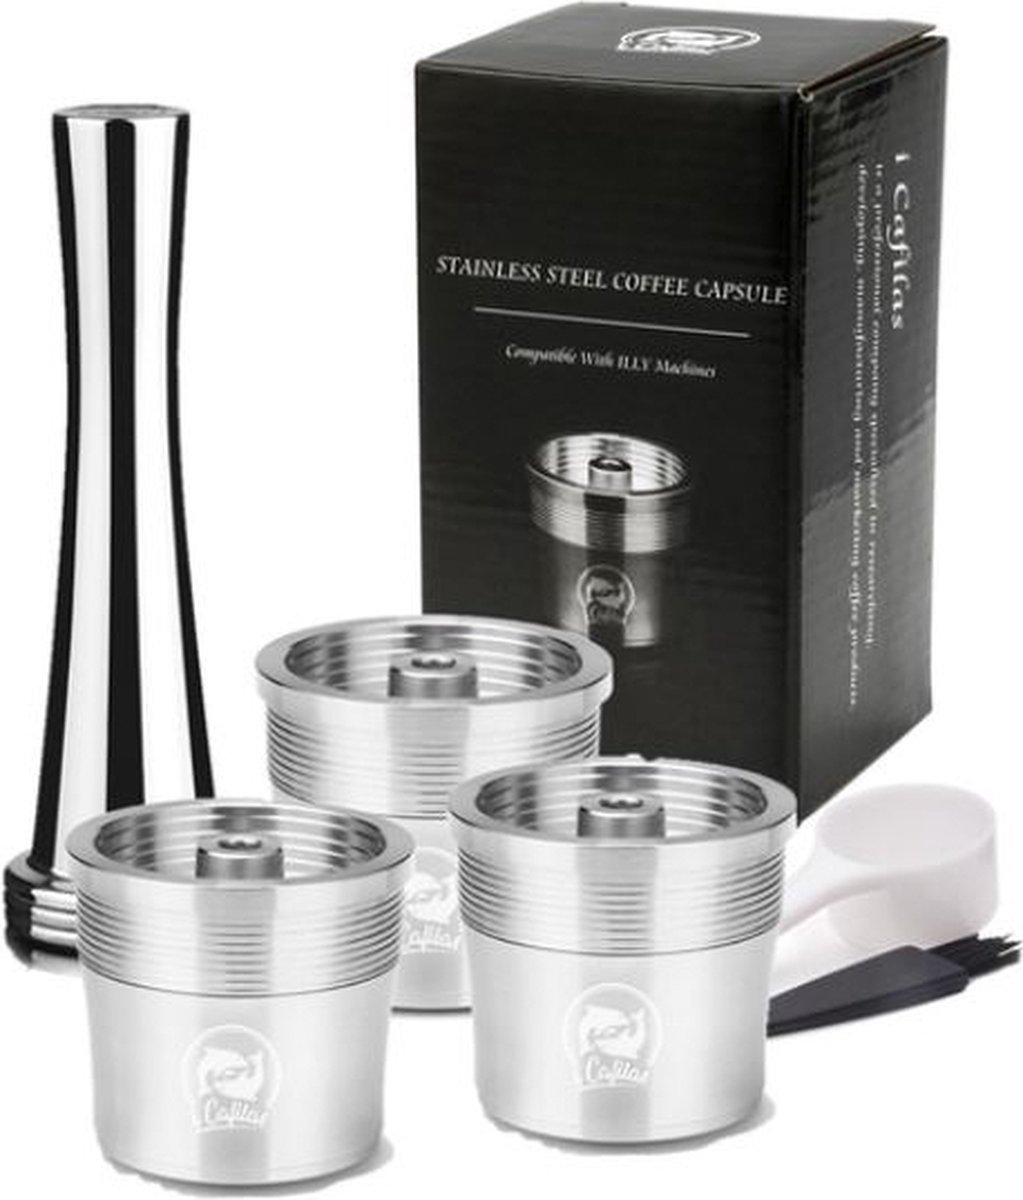 Hervulbare Illy koffiecup - Illy Capsule - RVS - 3 cups + stamper - illy hervulbare koffie capsule